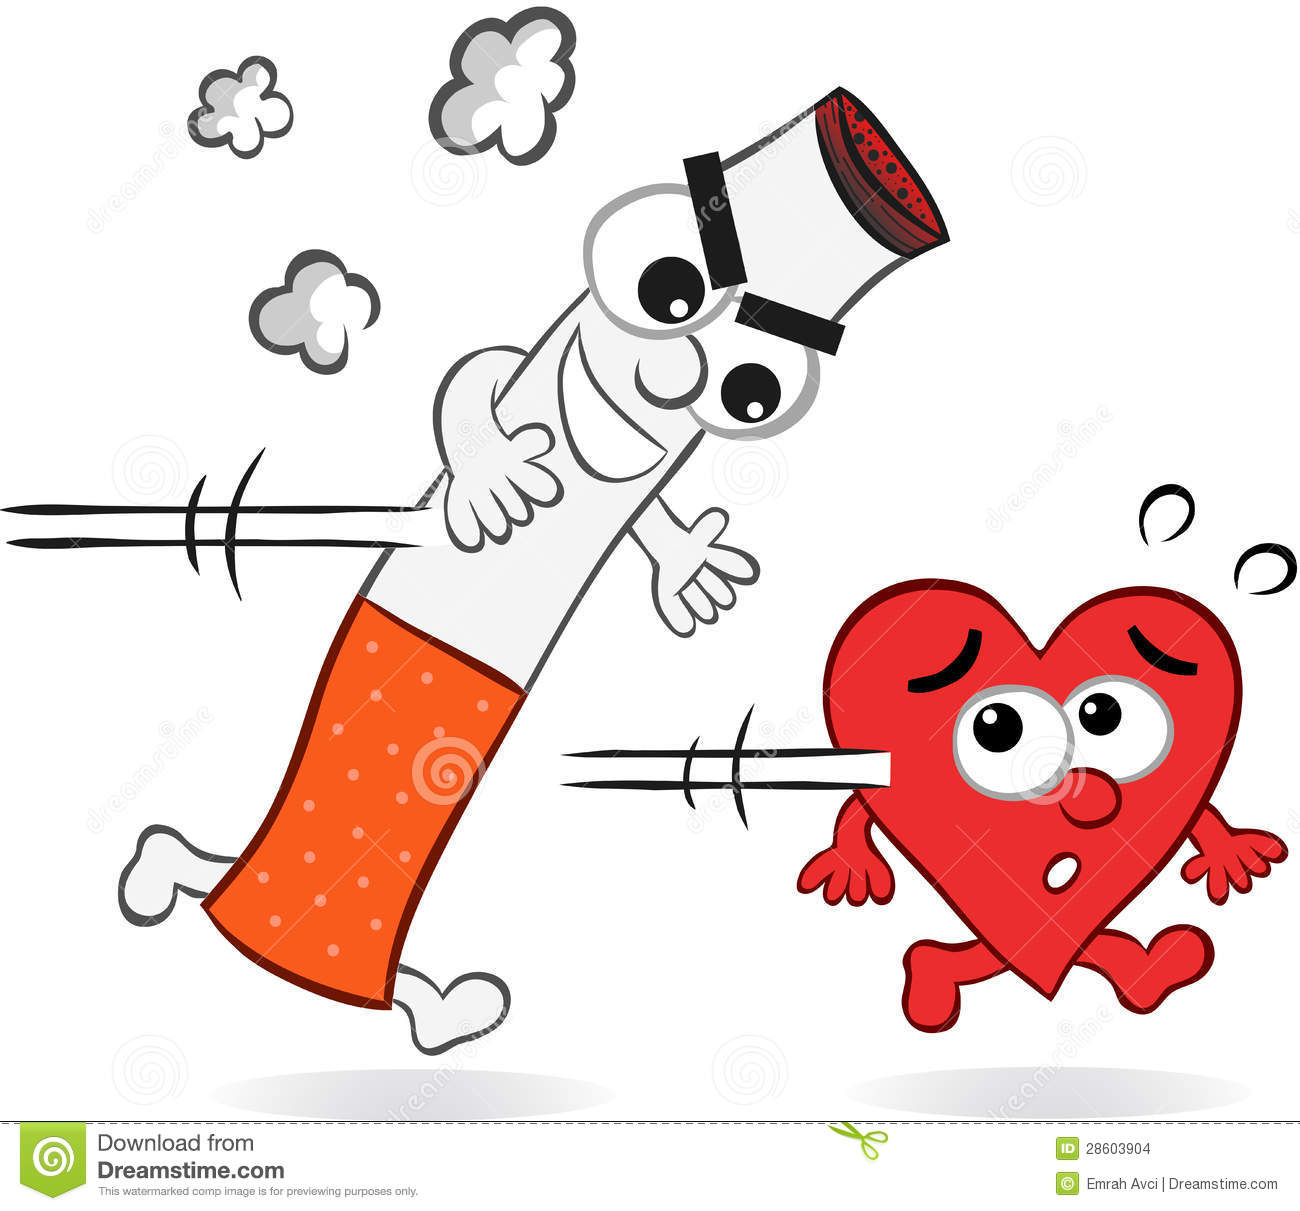 Stock Images  Cigarette And Heart Cartoon  Image  28603904